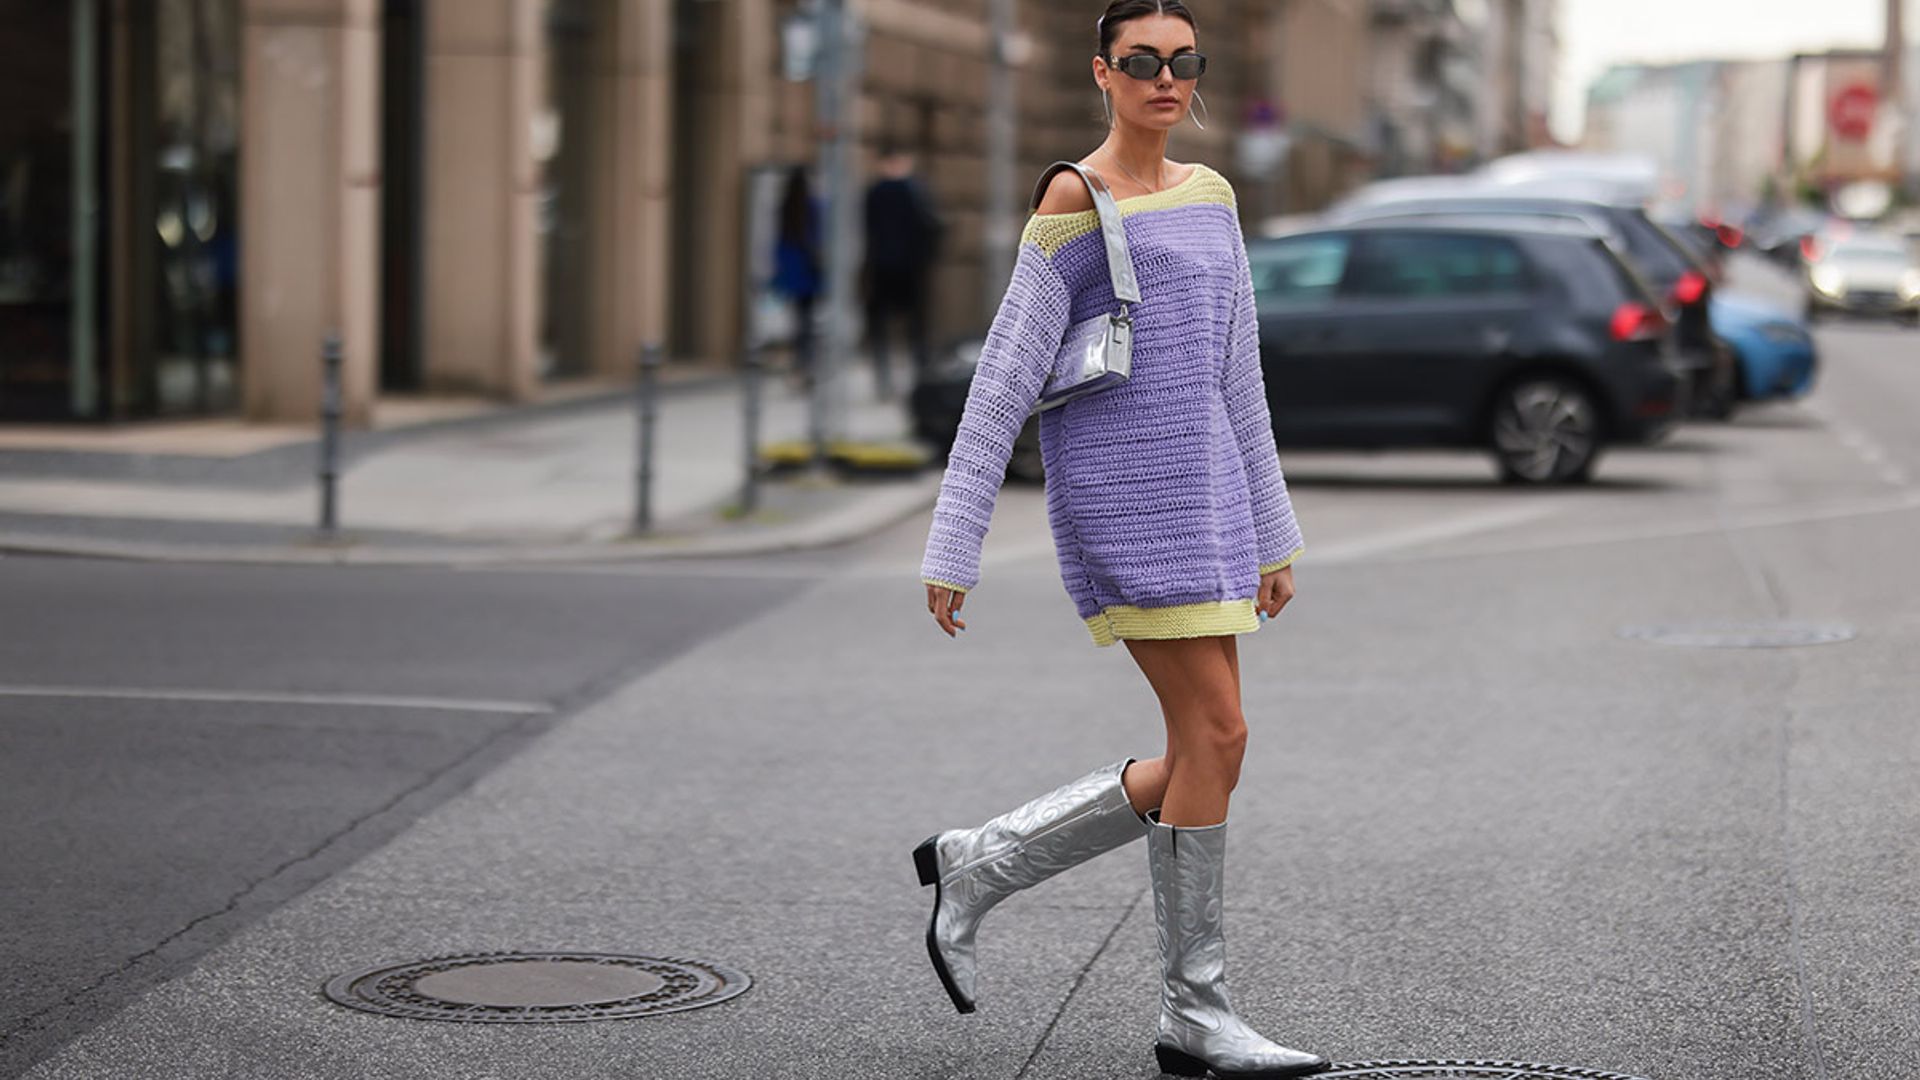 The 14 best dress and boot combinations to try this season